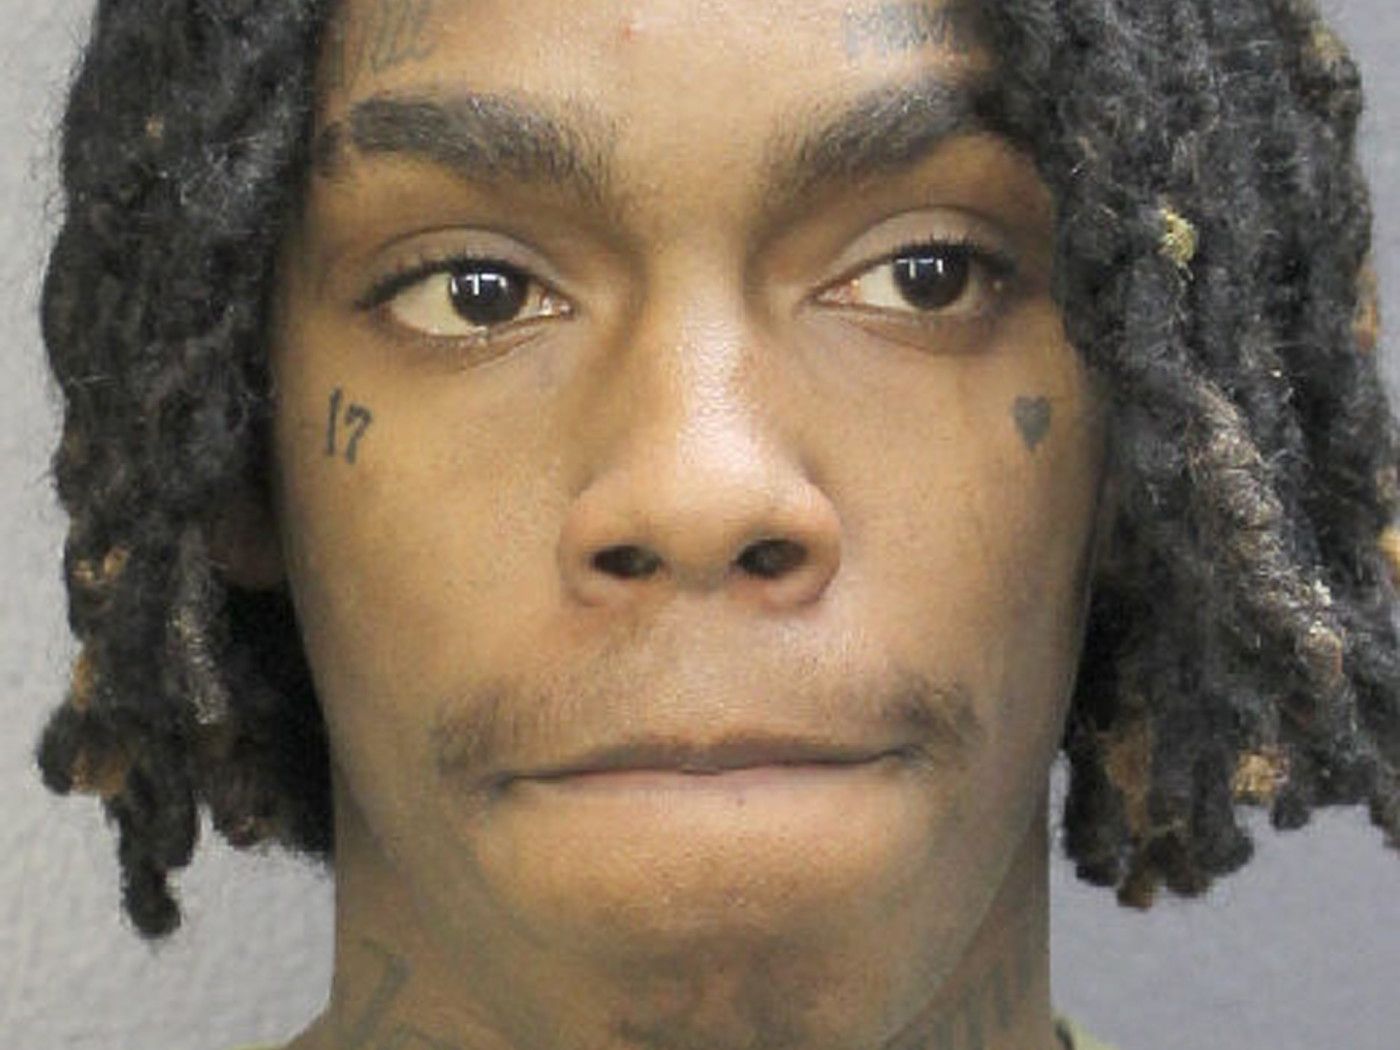 YNW Melly: A Timeline of His Legal Situation and Murder Arrest